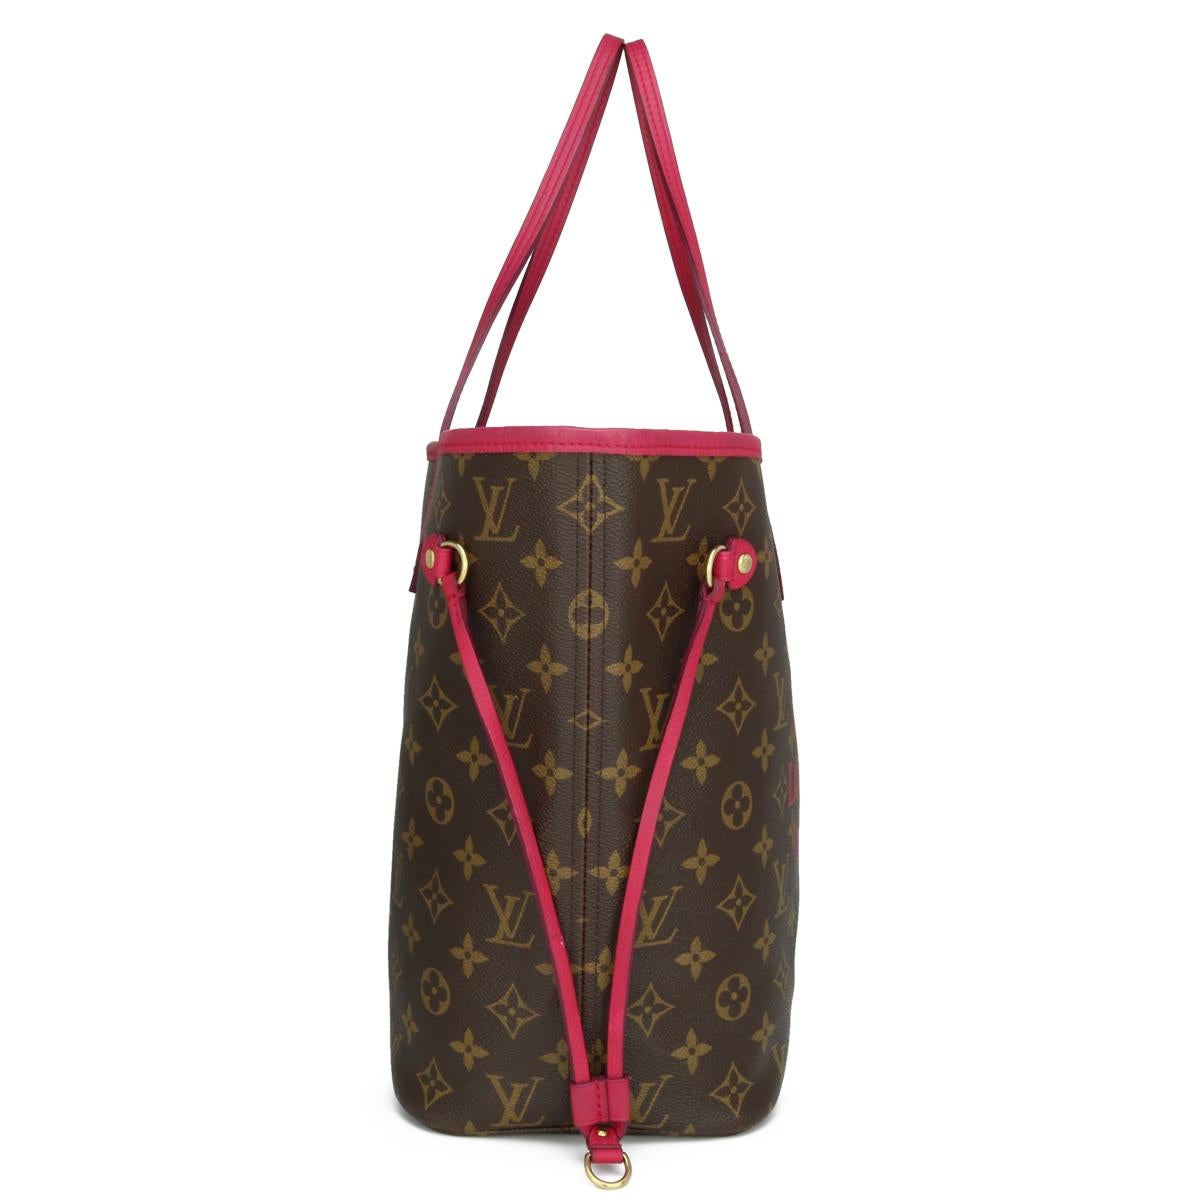 Louis Vuitton Neverfull MM Ikat Bag in Monogram Fuchsia 2013 Limited Edition For Sale 1